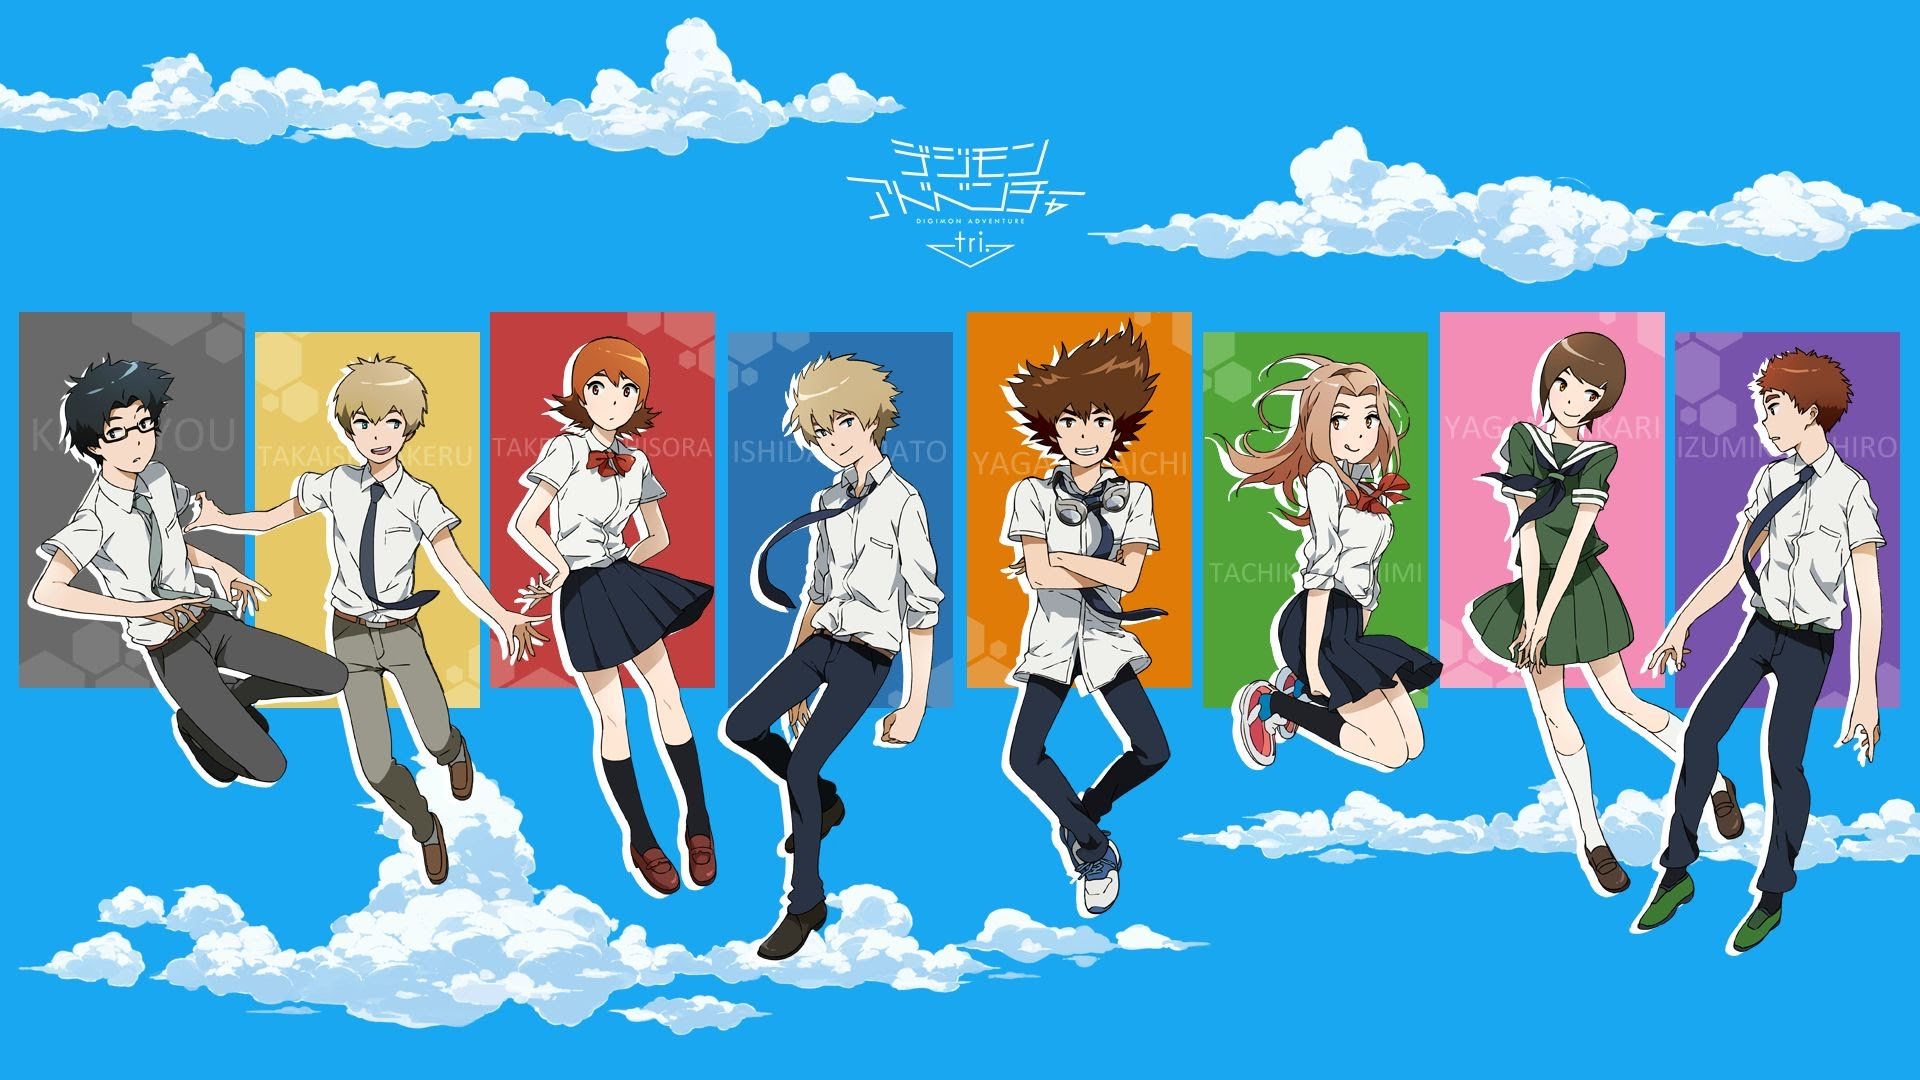 Final Digimon Adventure Tri Movie Is Coming to Theaters This September